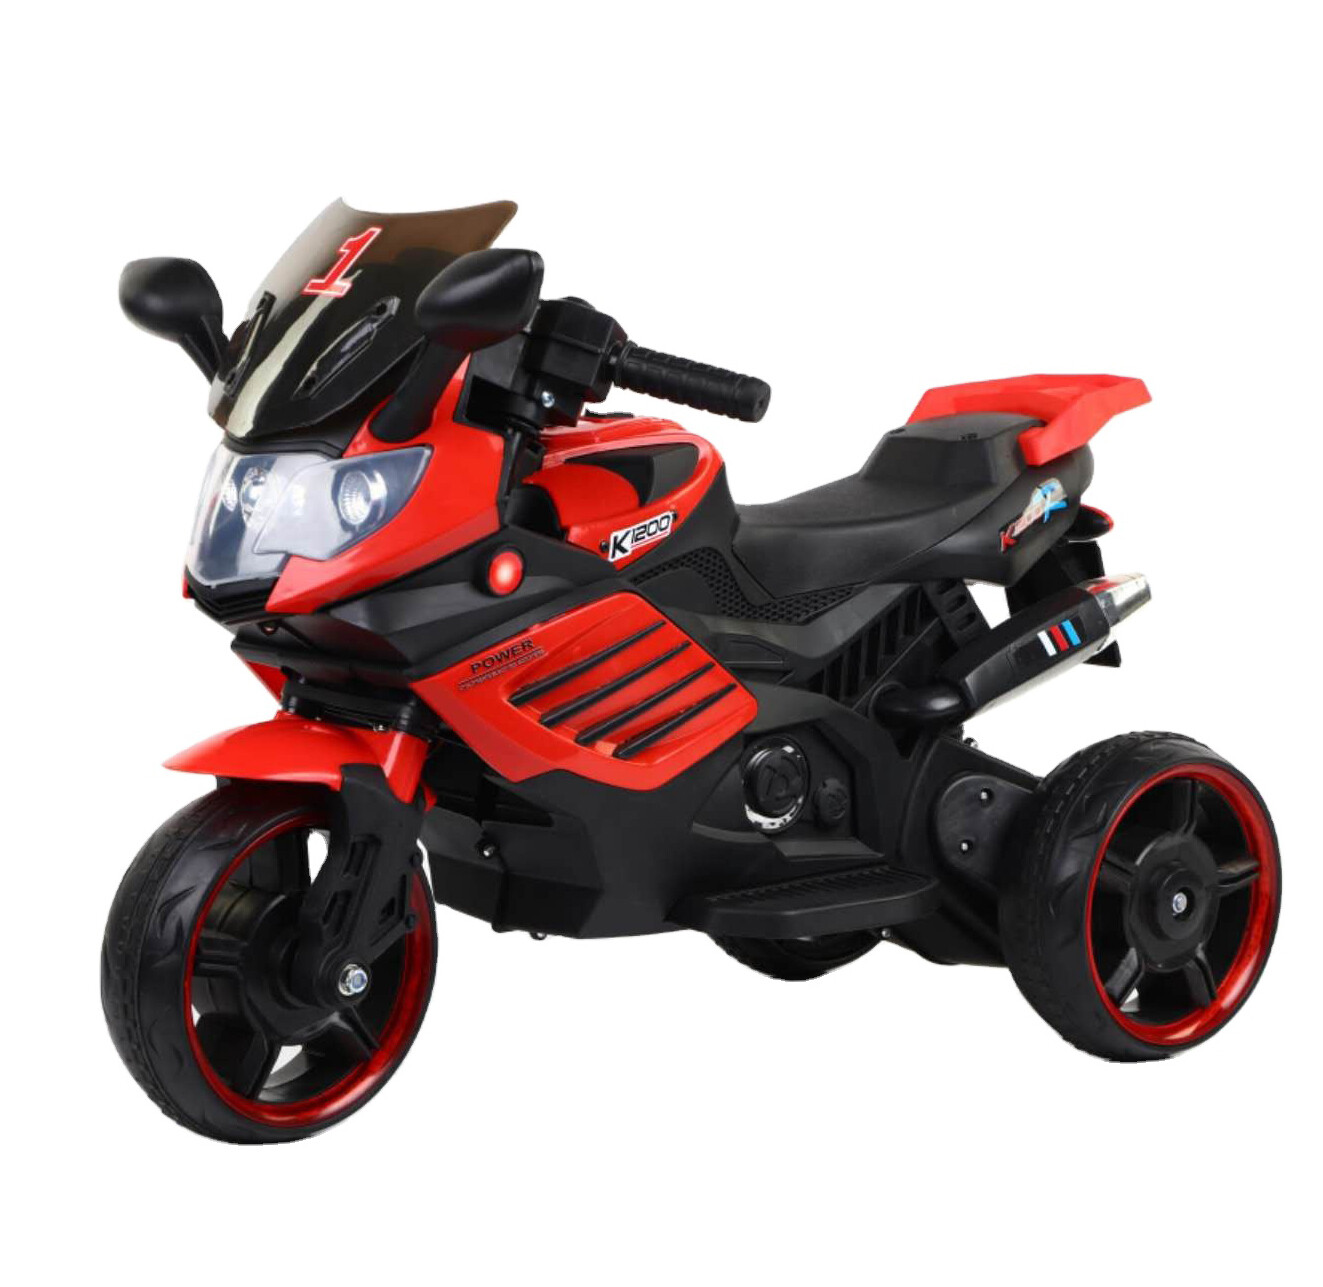 Baby ride on toy musical light up 6V mini motorcycle electric toy car with music - Red